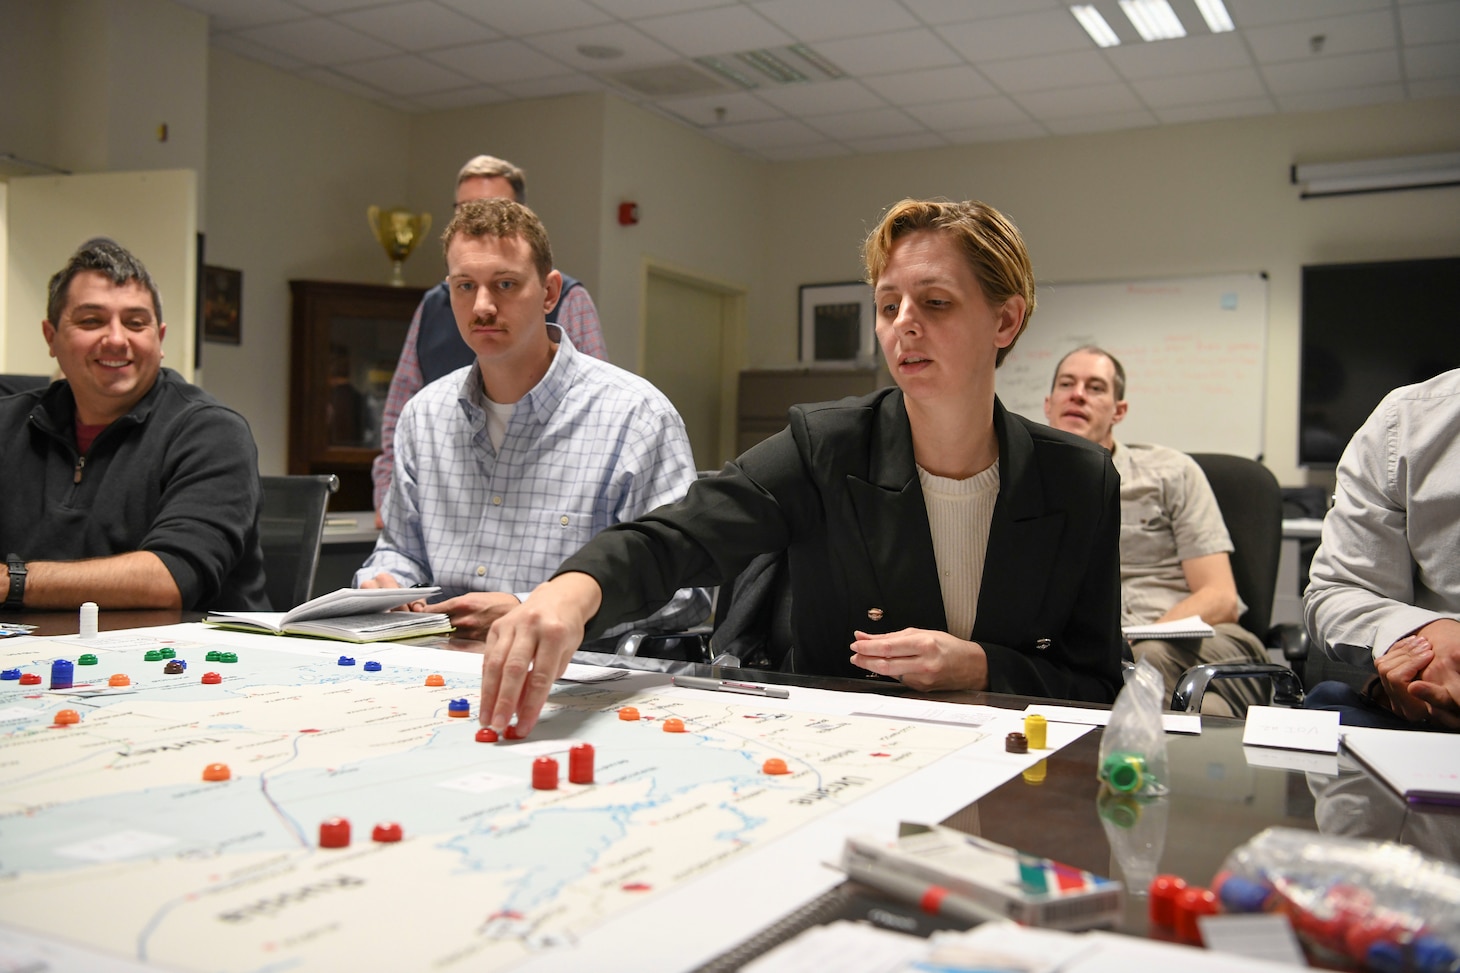 The U.S. Naval Post Graduate School (NPS) conducted a two-week Basic Analytic Wargaming Course (BAWC) for U.S. Sixth Fleet on Naval Support Activity (NSA) Naples, Italy, Feb. 27-March 10, 2023. For more than 80 years, U.S. Naval Forces Europe-U.S. Naval Forces Africa (NAVEUR-NAVAF) has forged strategic relationships with allies and partners, leveraging a foundation of shared values to preserve security and stability. Headquartered in Naples, Italy, NAVEUR-NAVAF operates U.S. naval forces in the U.S. European Command (USEUCOM) and U.S. Africa Command (USAFRICOM) areas of responsibility. U.S. Sixth Fleet is permanently assigned to NAVEUR-NAVAF, and employs maritime forces through the full spectrum of joint and naval operations.